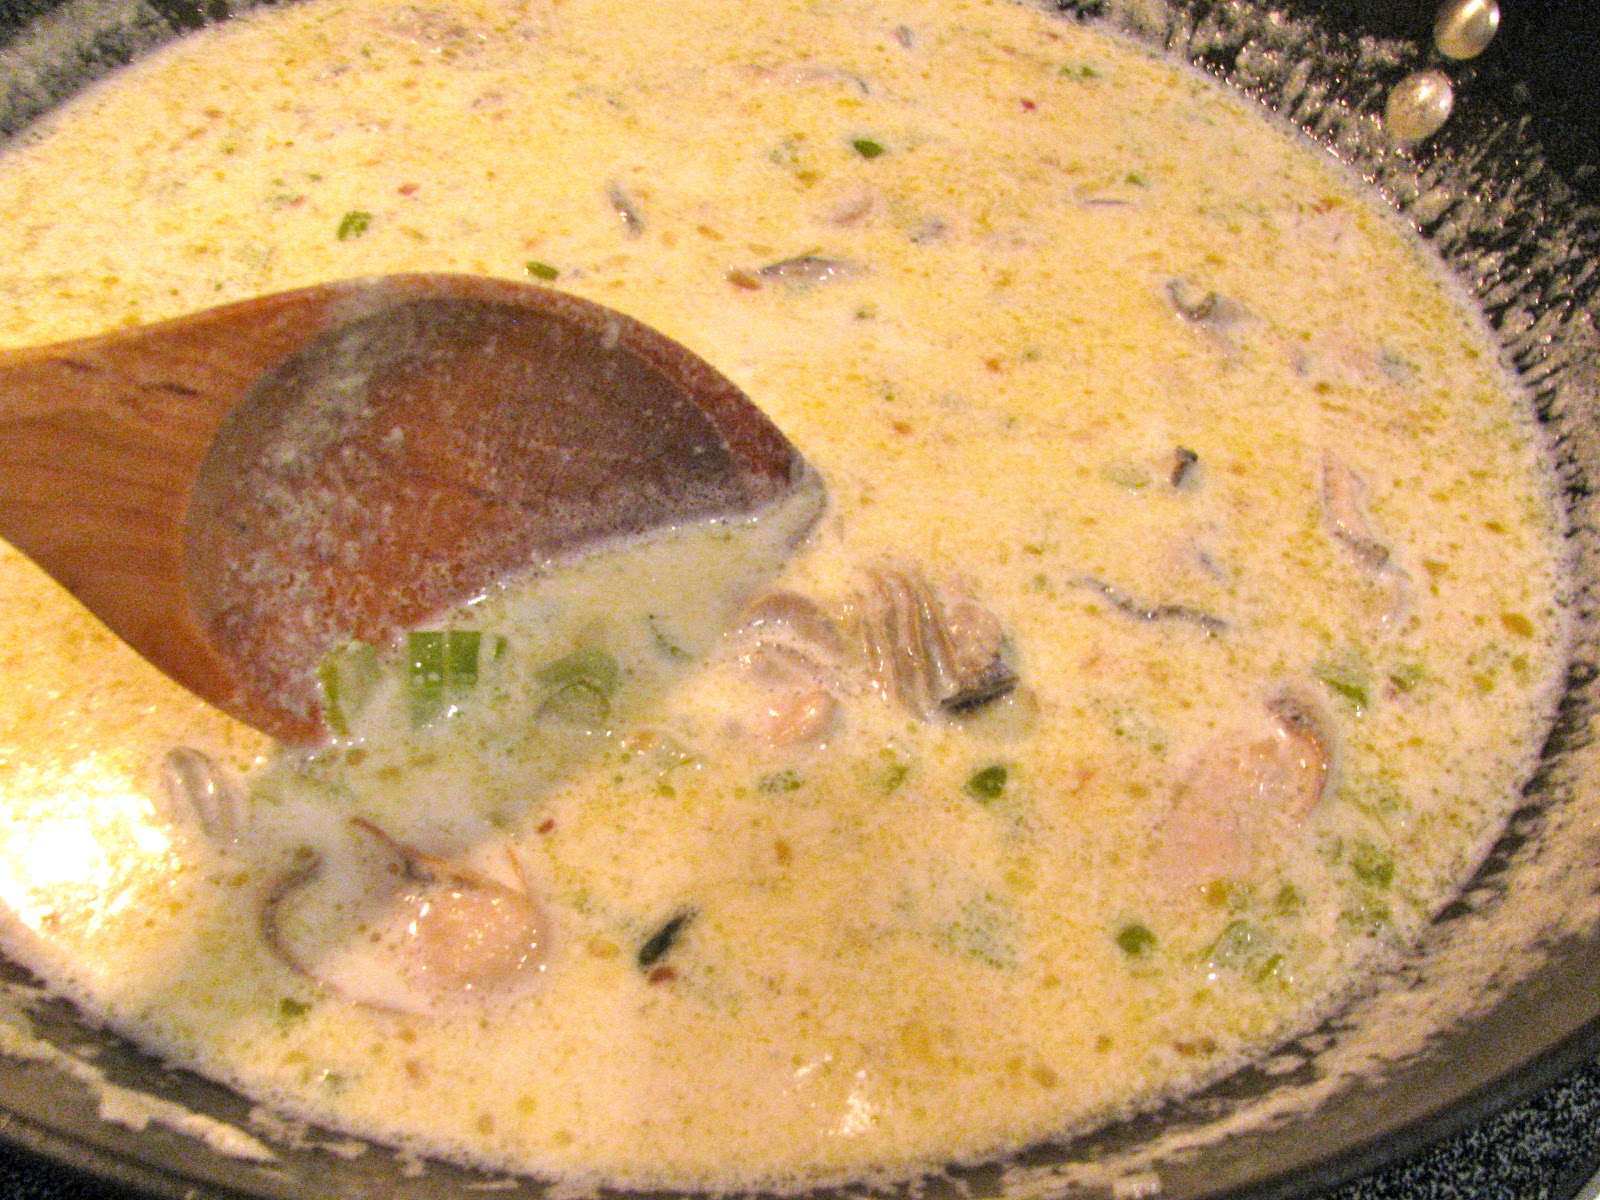 Antoine's Oyster Stew is an Unapologetic Classic - SippitySup